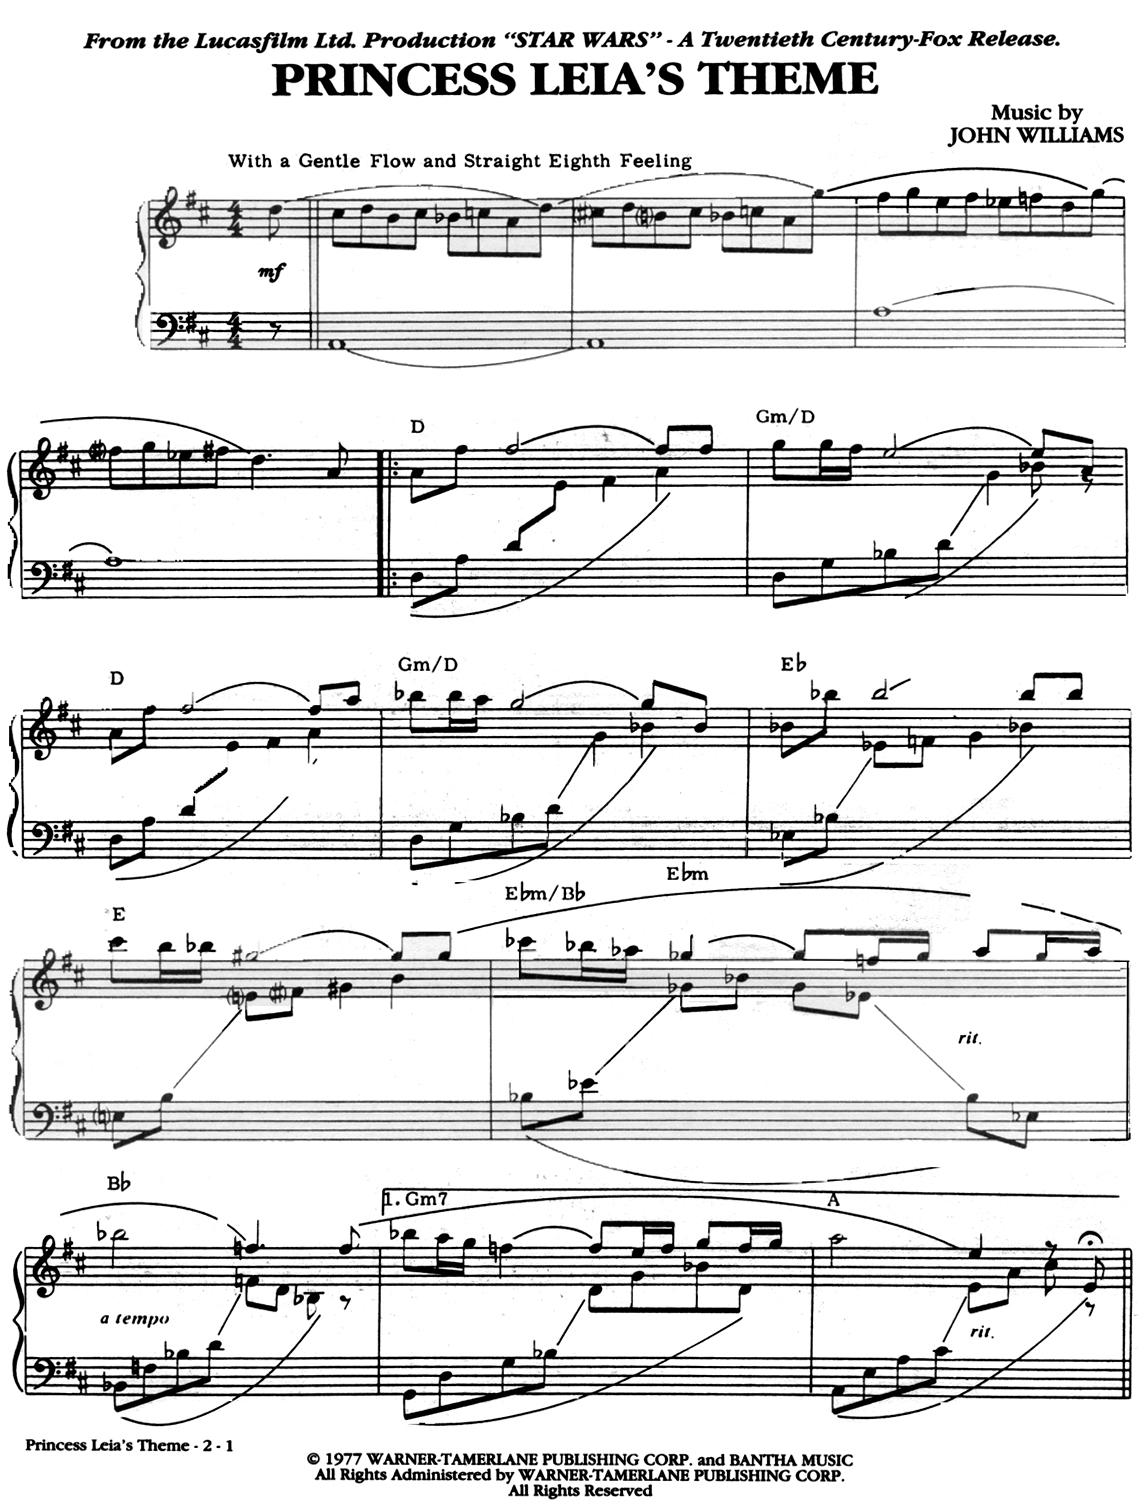 Duel of the Fates - Bb Trumpet Sheet Music 